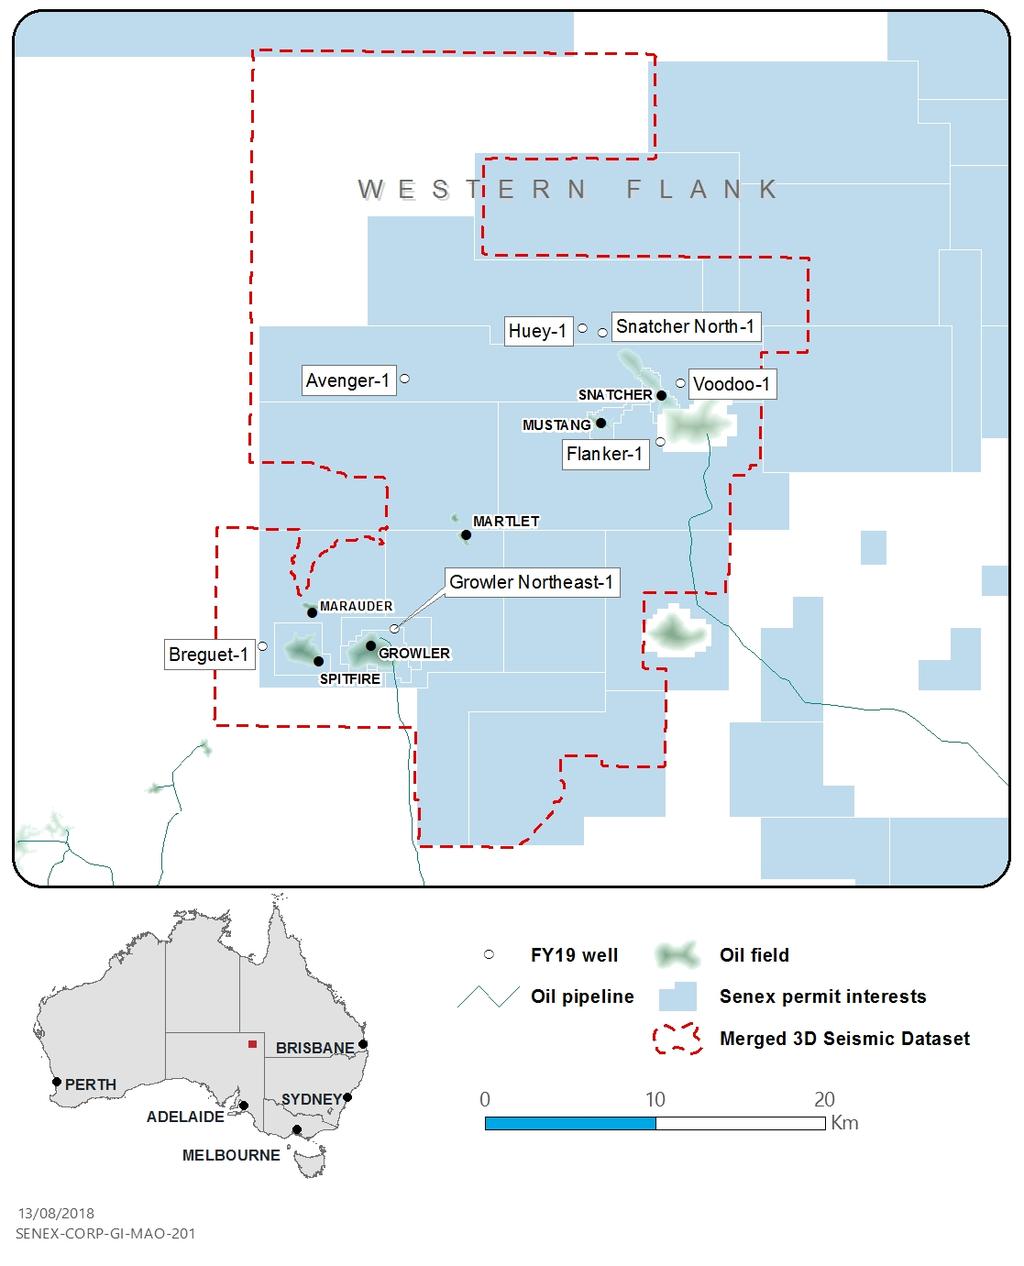 Cooper Basin Oil 8 Overview Prolific hydrocarbon basin and long-established producing region Prioritised focus on western flank; rationalisation of non-core acreage ongoing Ten-well FY19 drilling